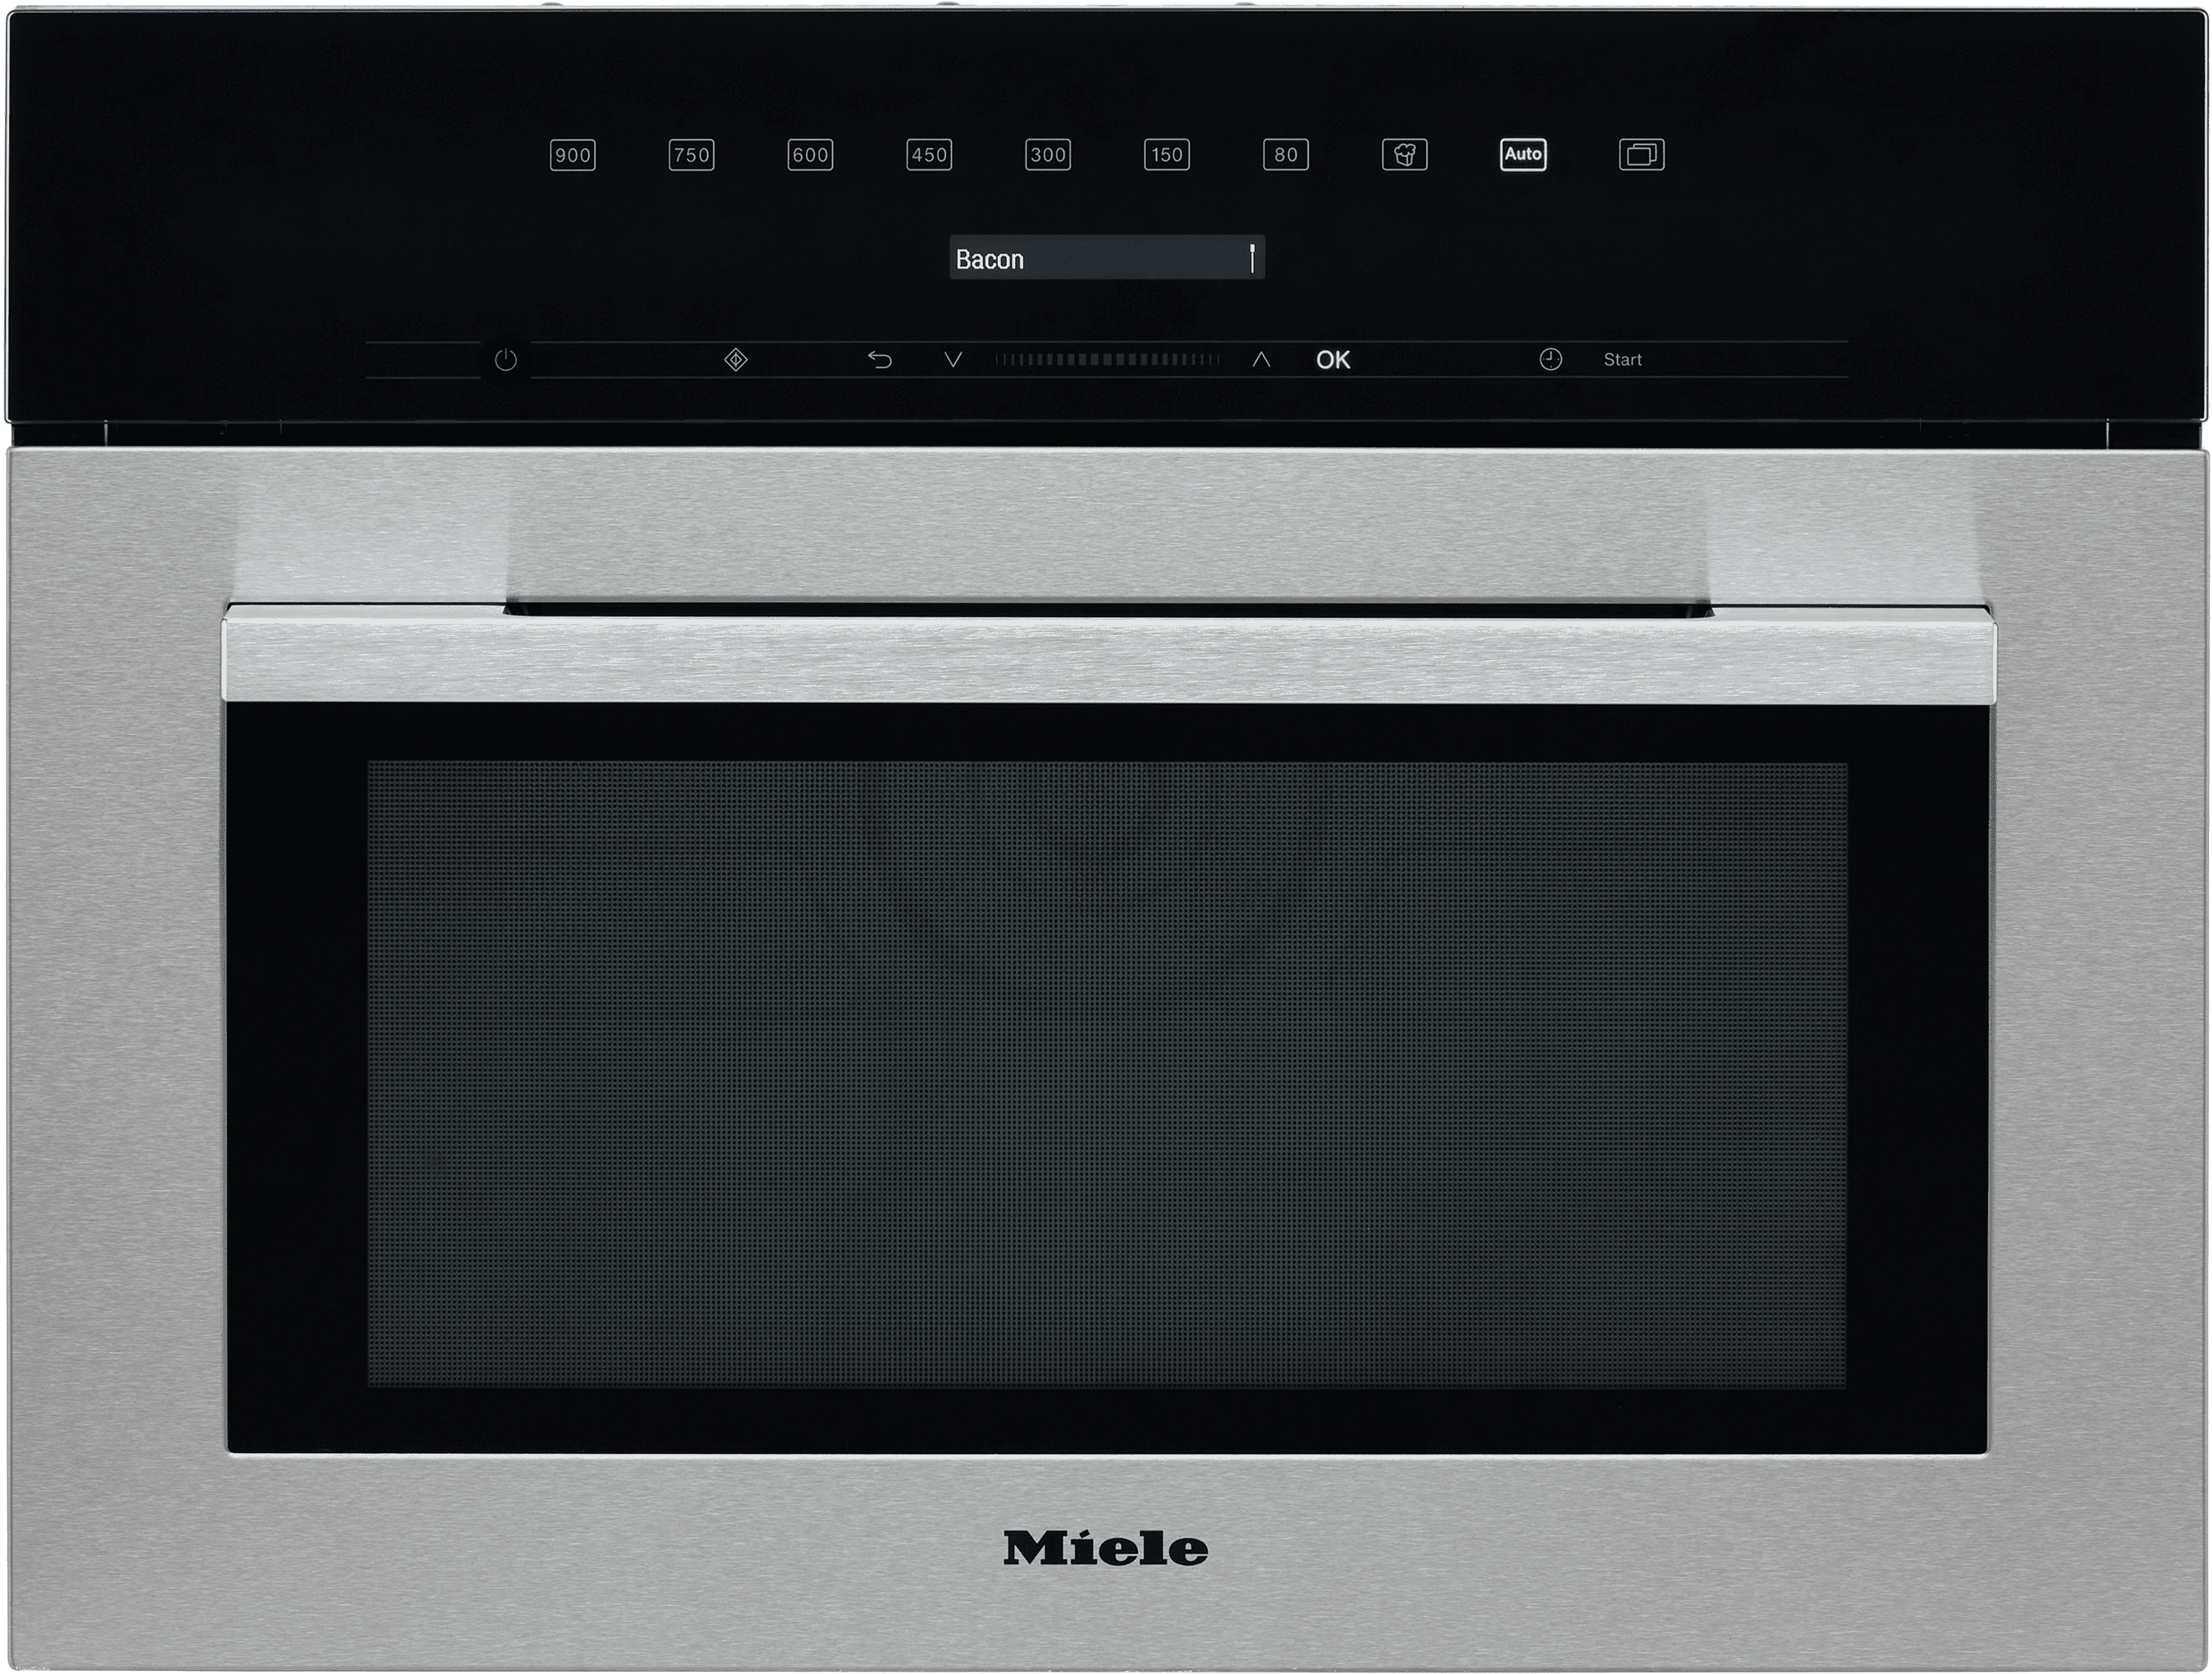 Miele M7140TC 45cm tall, 60cm wide, Built In Microwave - Clean Steel, Stainless Steel